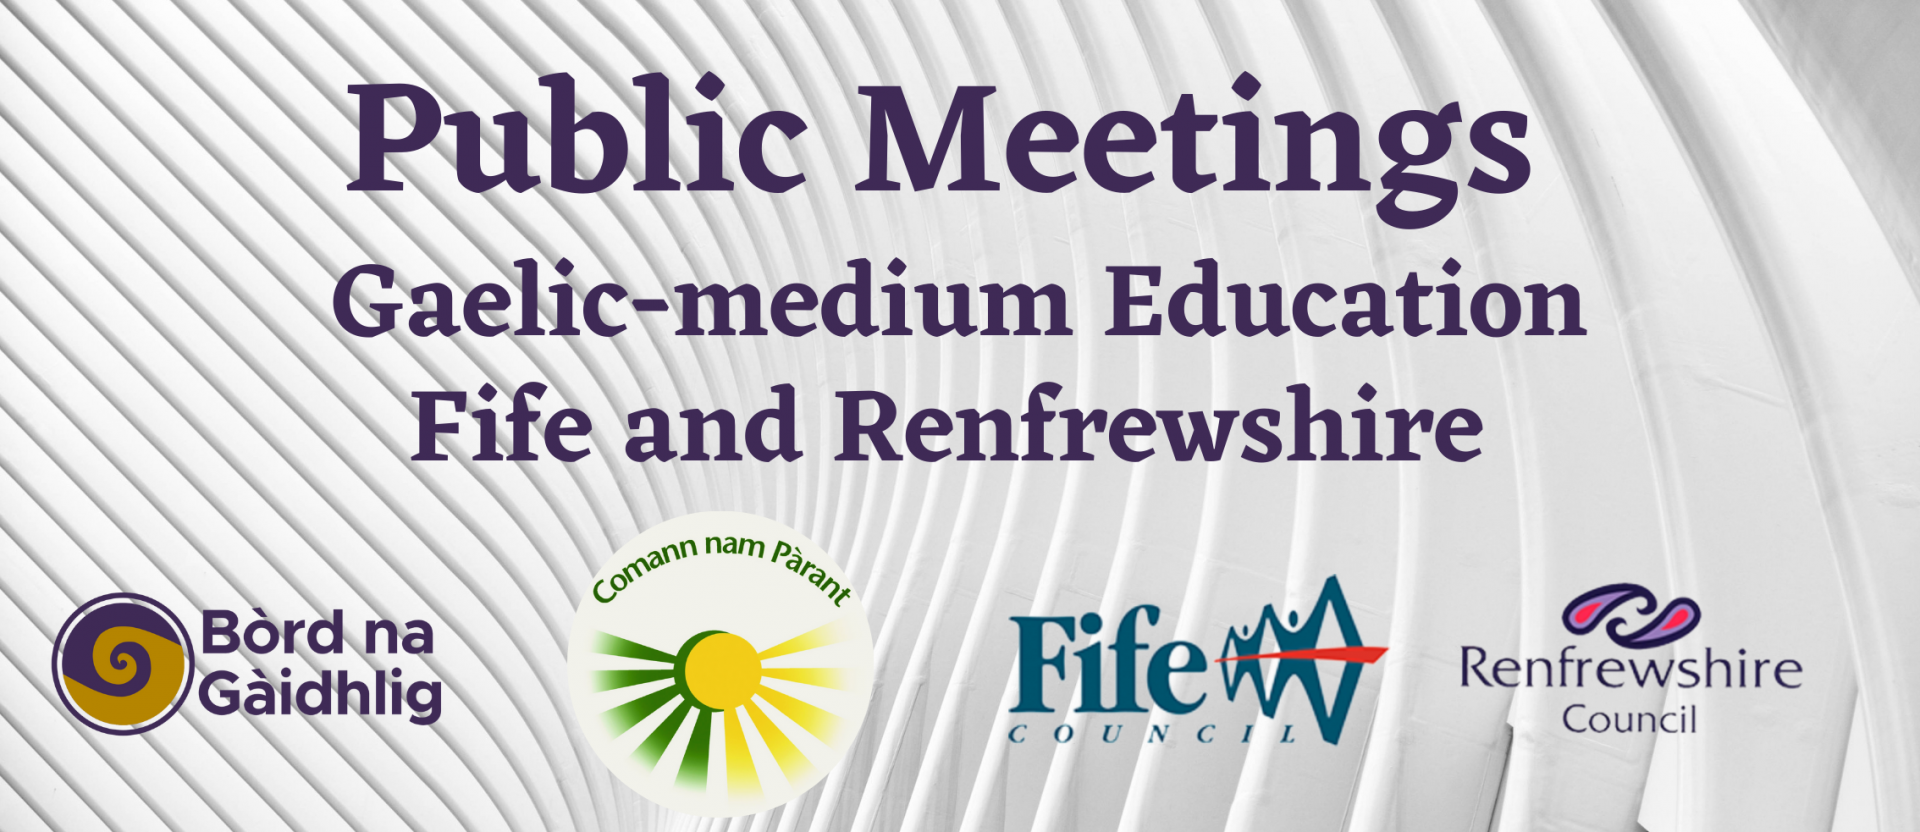 Graphic: The Bòrd na Gàidhlig, Comunn nam Pàrant, Fife Coulncil, and Renfrewshire Council logos on a silver background. Text reads 'Public meetings. Gaelic Medium Education Fife and Renfrewshire'.